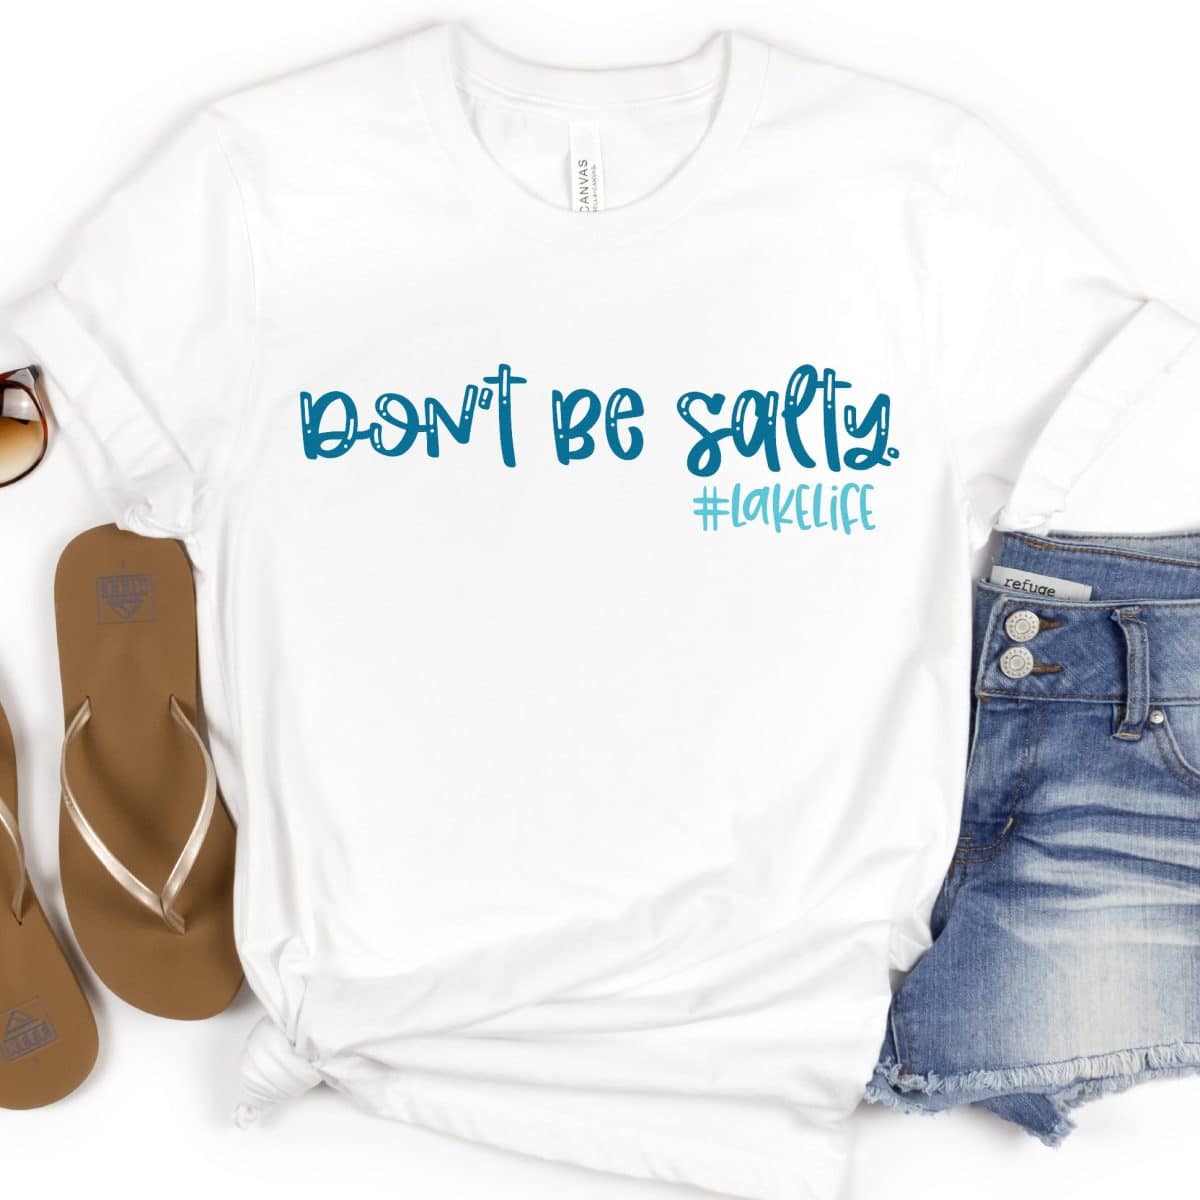 Don't be Salty Shirt by Hey Let's Make Stuff